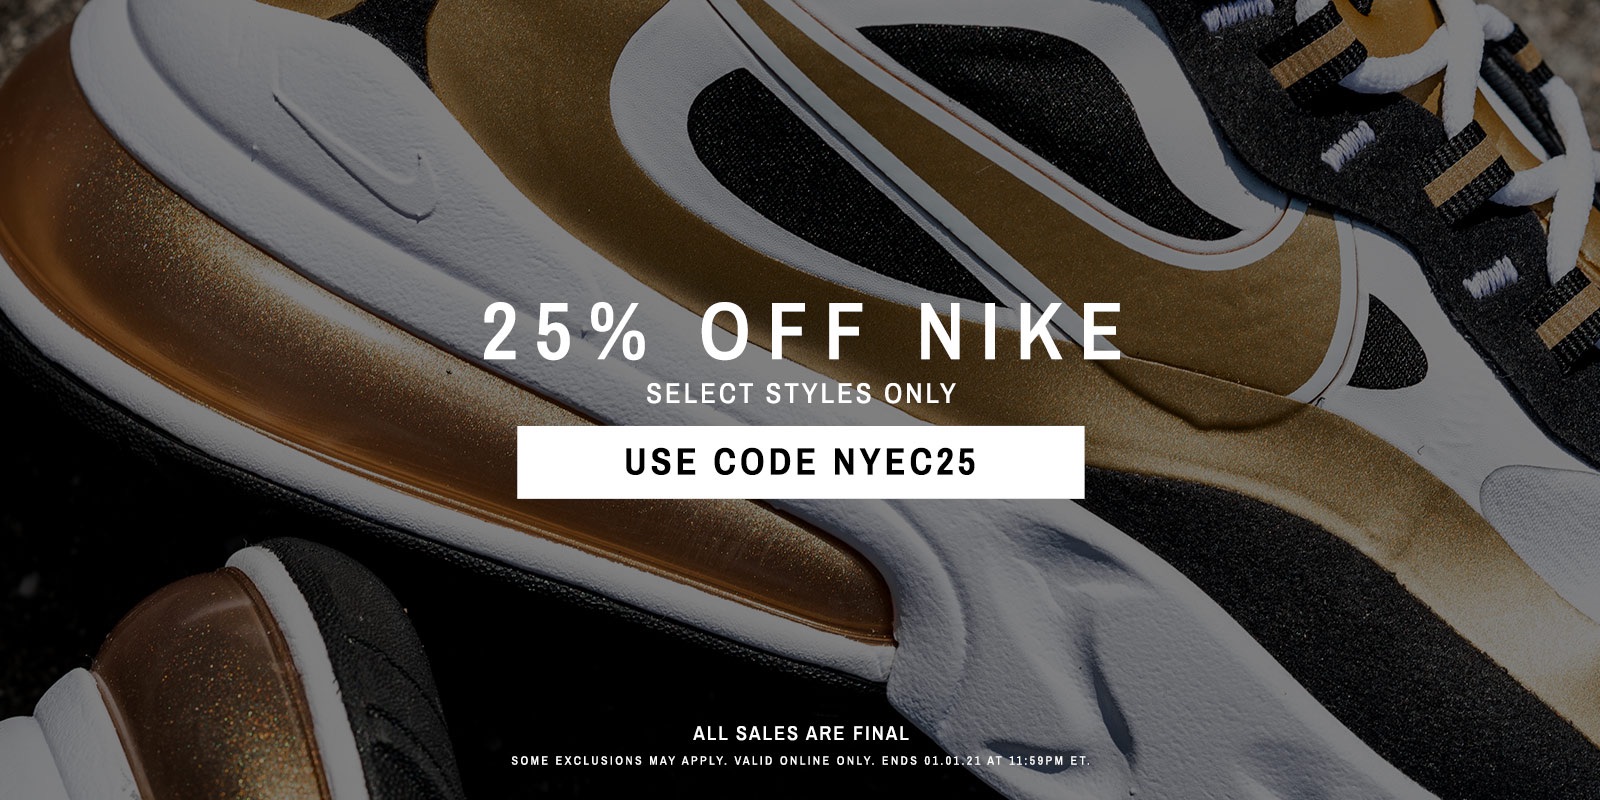 MoreSneakers.com on X: "AD: US DEAL Nike Flash sale via YCMC - EXTRA 25%  OFF select styles with code NYEC25 => https://t.co/YK8r3uglZh  https://t.co/7zjlzS0UFw" / X